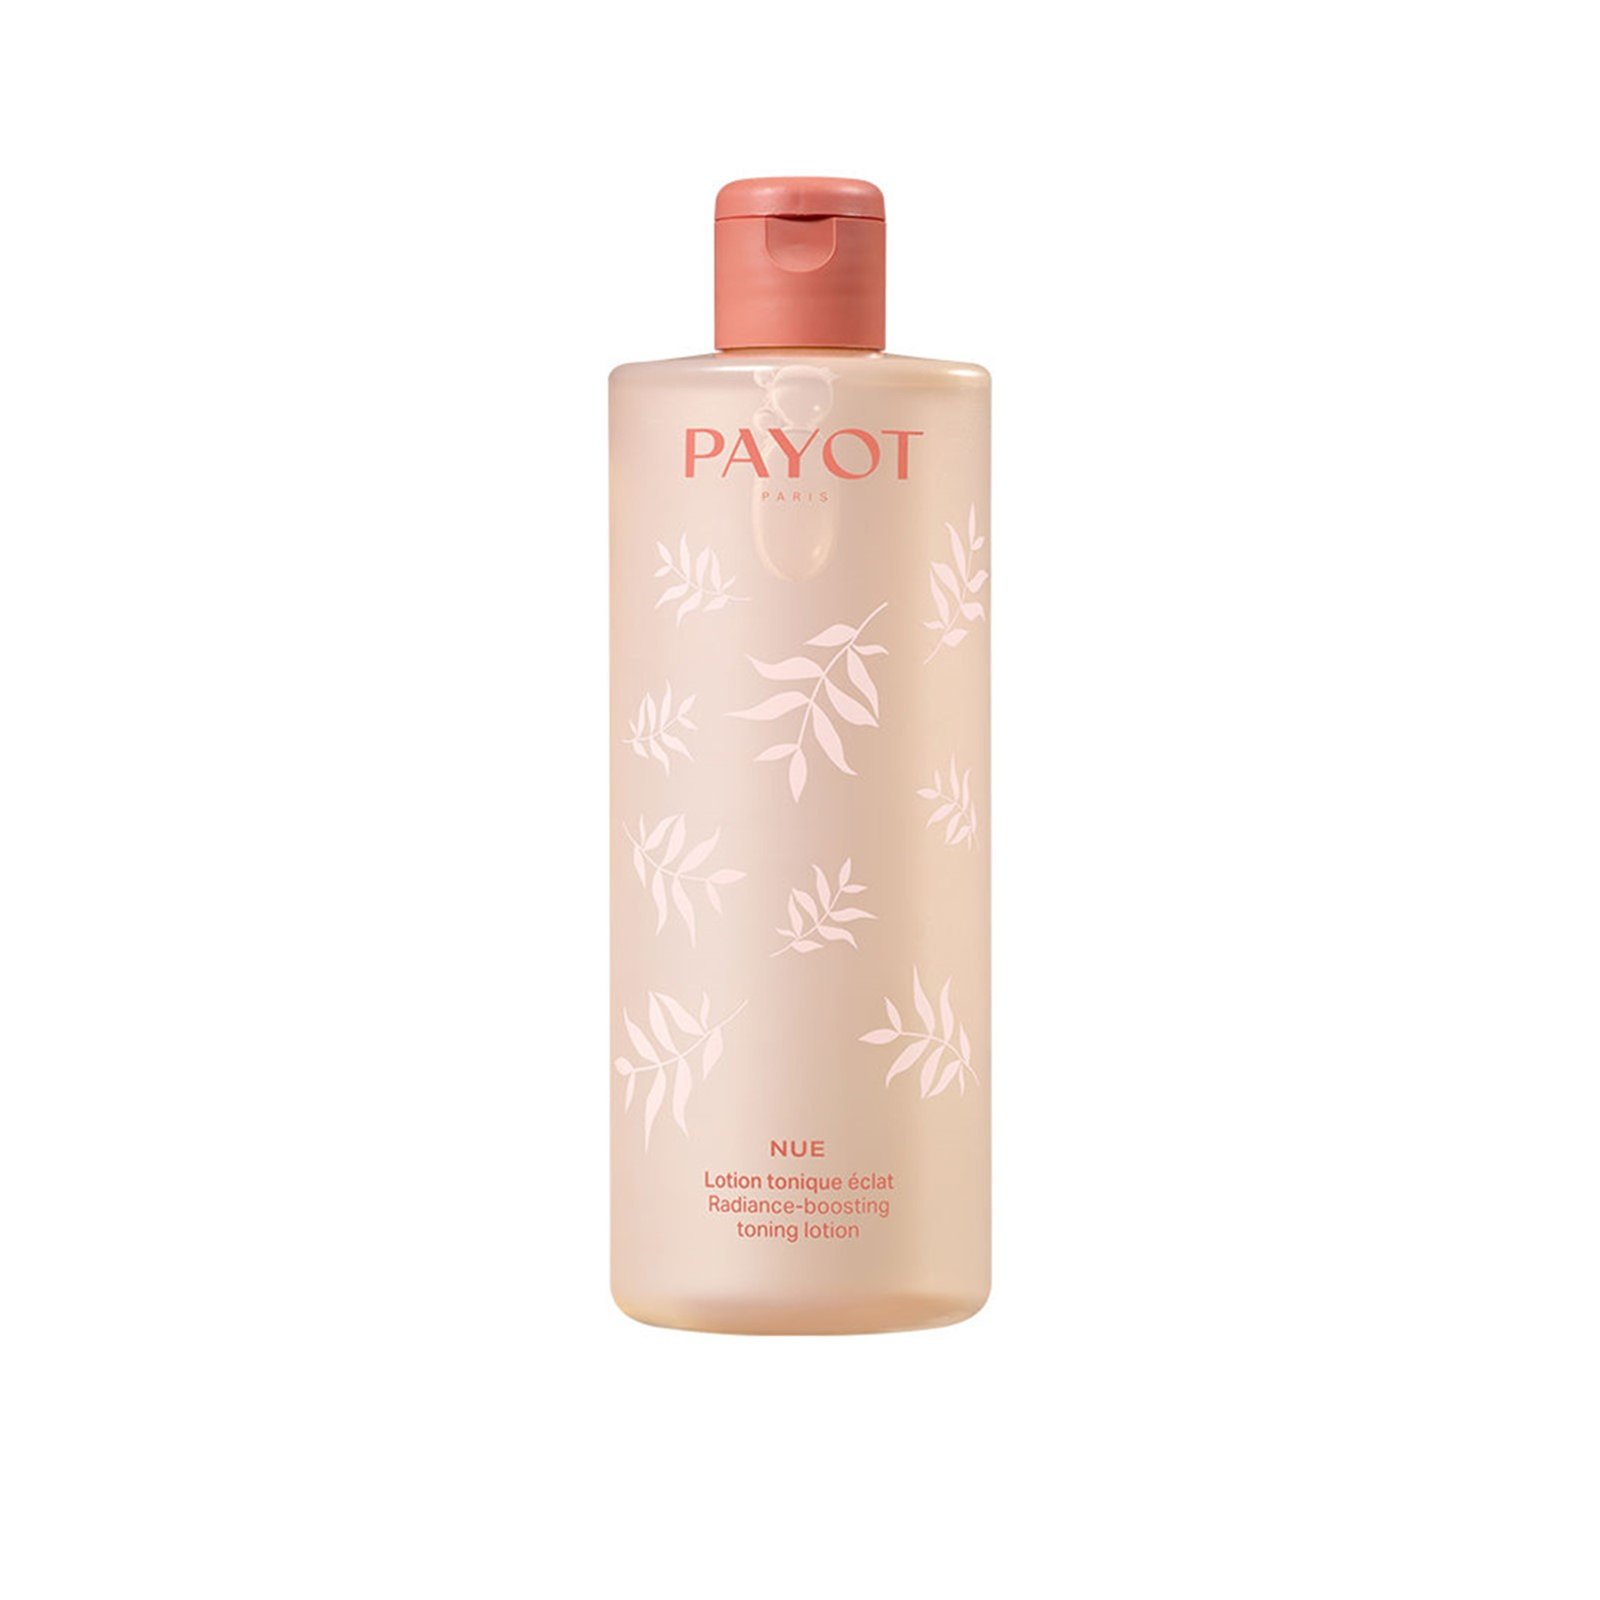 Payot Nue Radiance-Boosting Toning Lotion